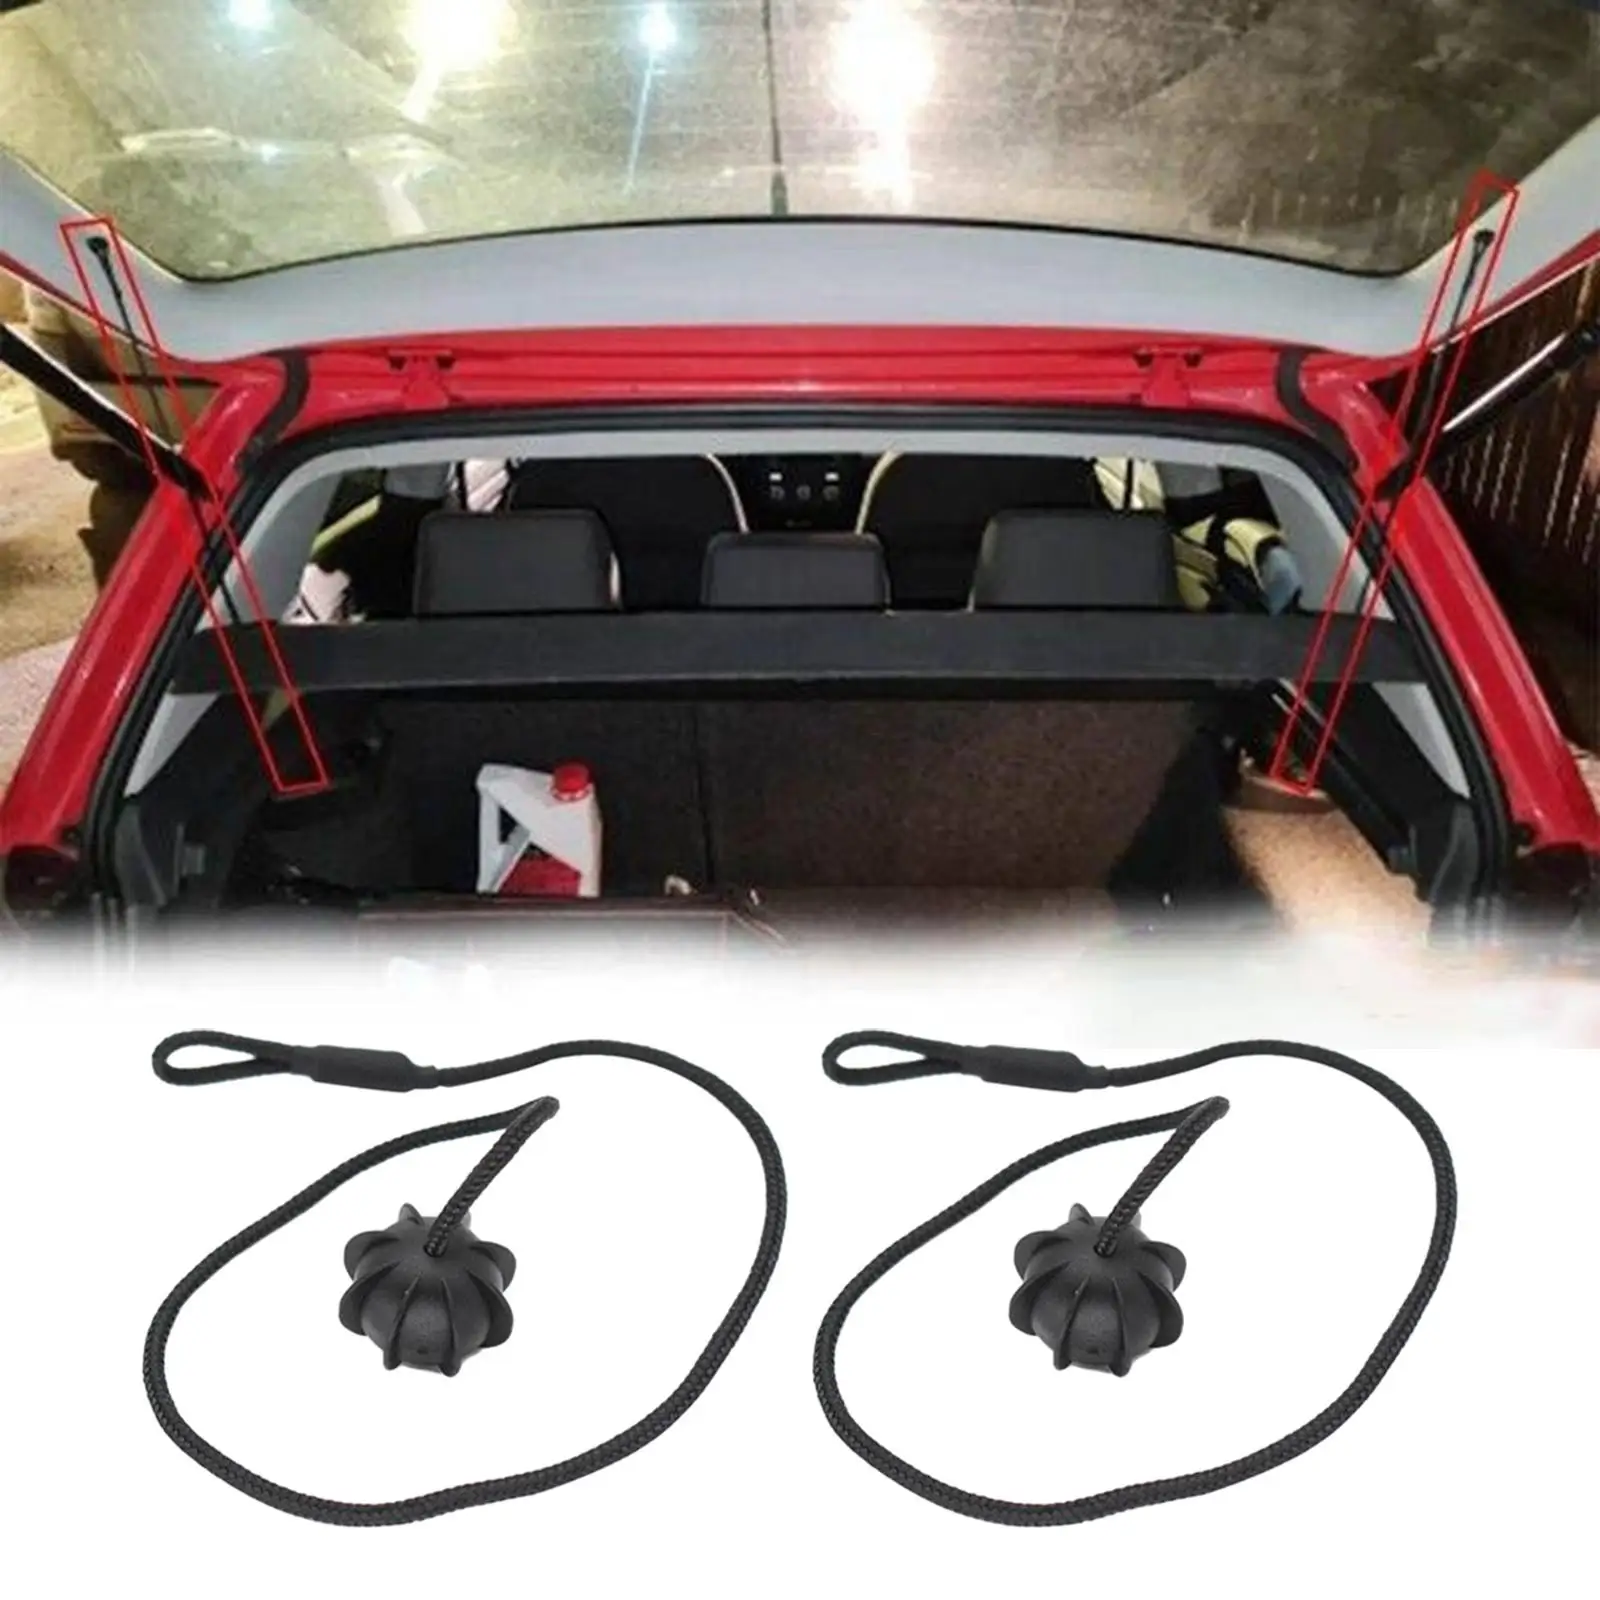 Multifunctional Parcel Shelf Lift Cover Strap Simple to Install Sturdy Parcel Shelf String for 1K6863447A Accessories